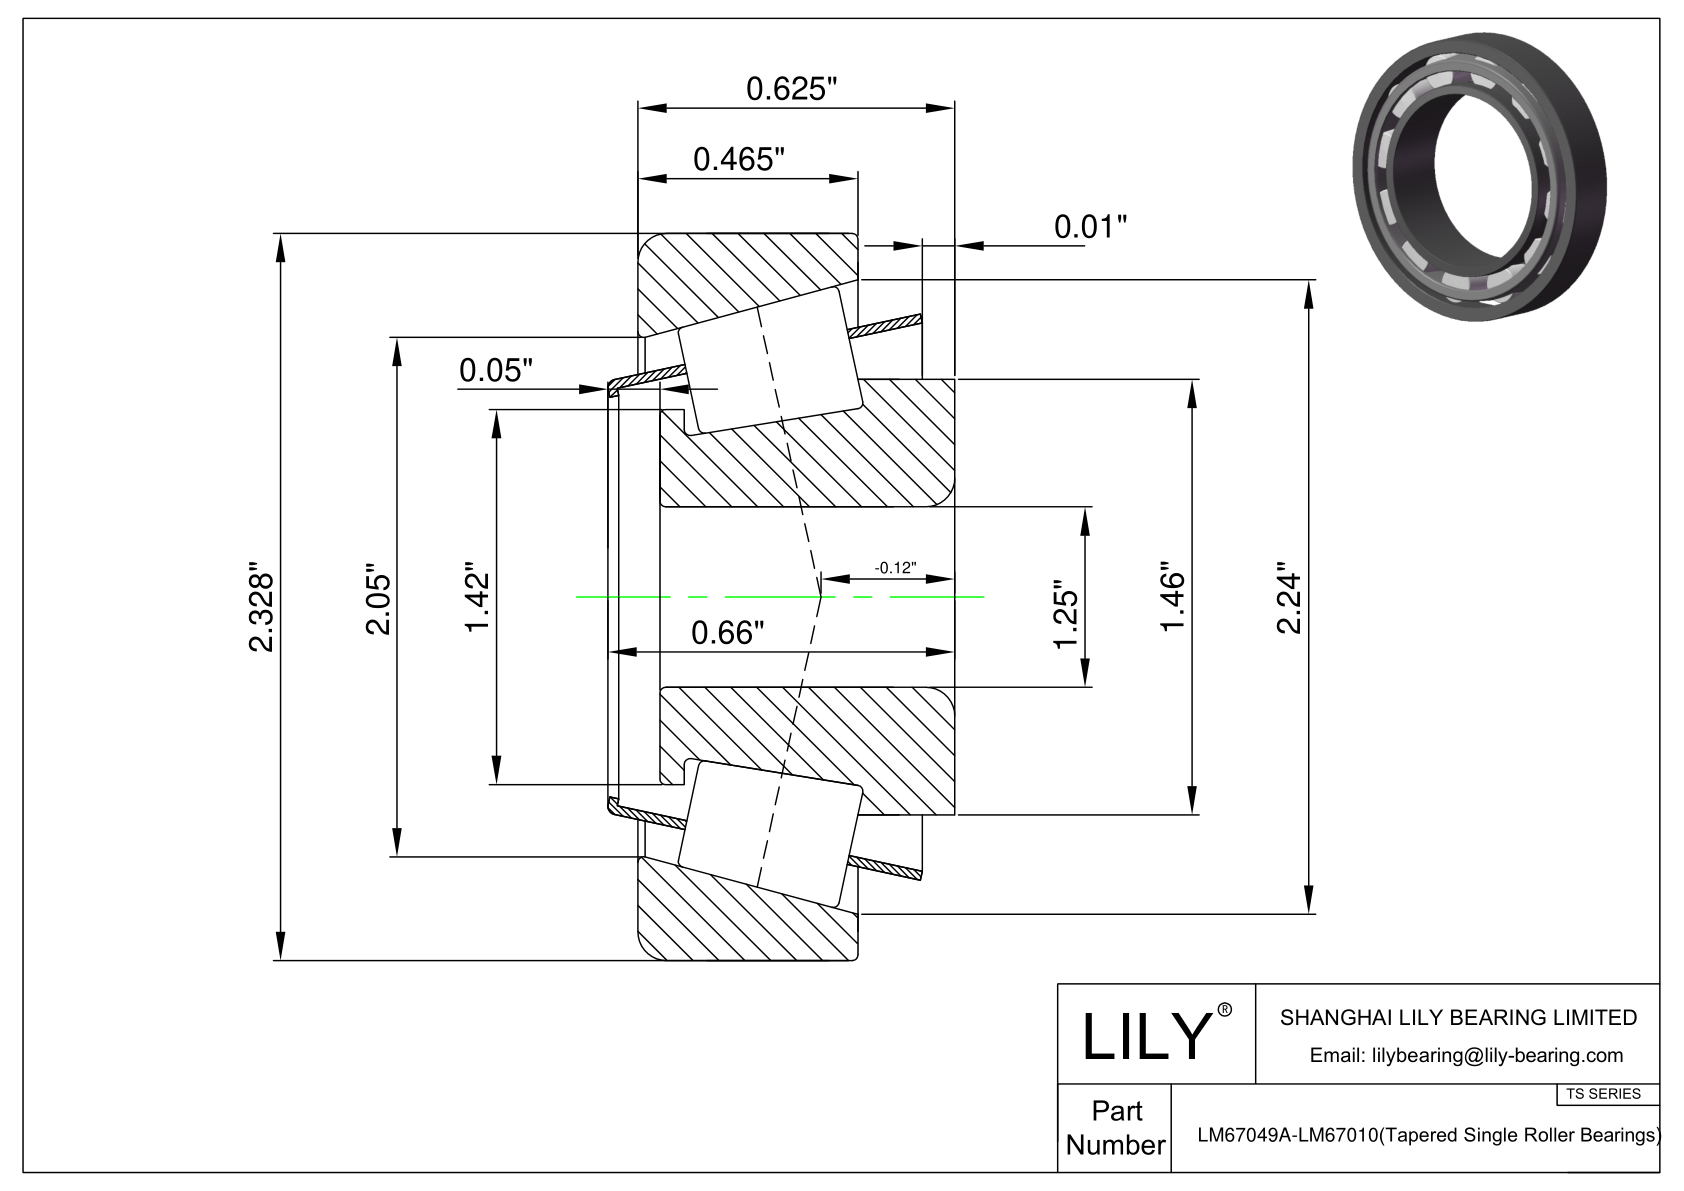 LM67049A-LM67010 TS (Tapered Single Roller Bearings) (Imperial) cad drawing